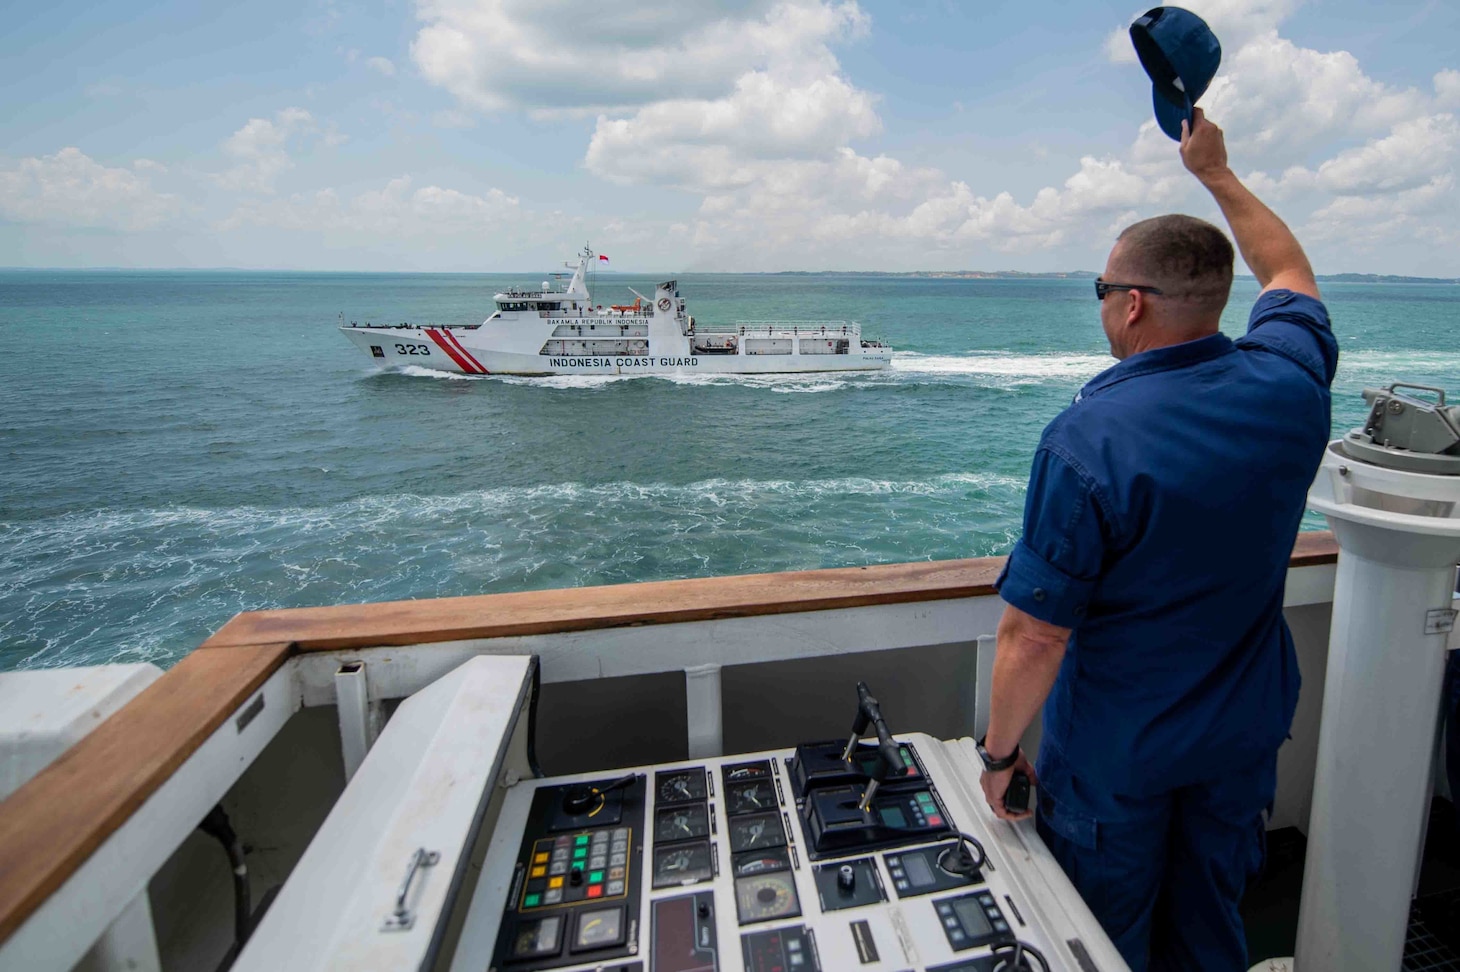 Capt. Blake Novak, commanding officer of Coast Guard Cutter Munro, waves goodbye after an exercise at sea with the Indonesian Coast Guard in the Singapore Strait, September 20, 2021. The United States Coast Guard is proud to operate with our Pacific counterparts, and together we are dedicated to enhancing capabilities, strengthening maritime governance and security while promoting a rules-based international order. (U.S. Coast Guard photo by Seaman Ian Gray)